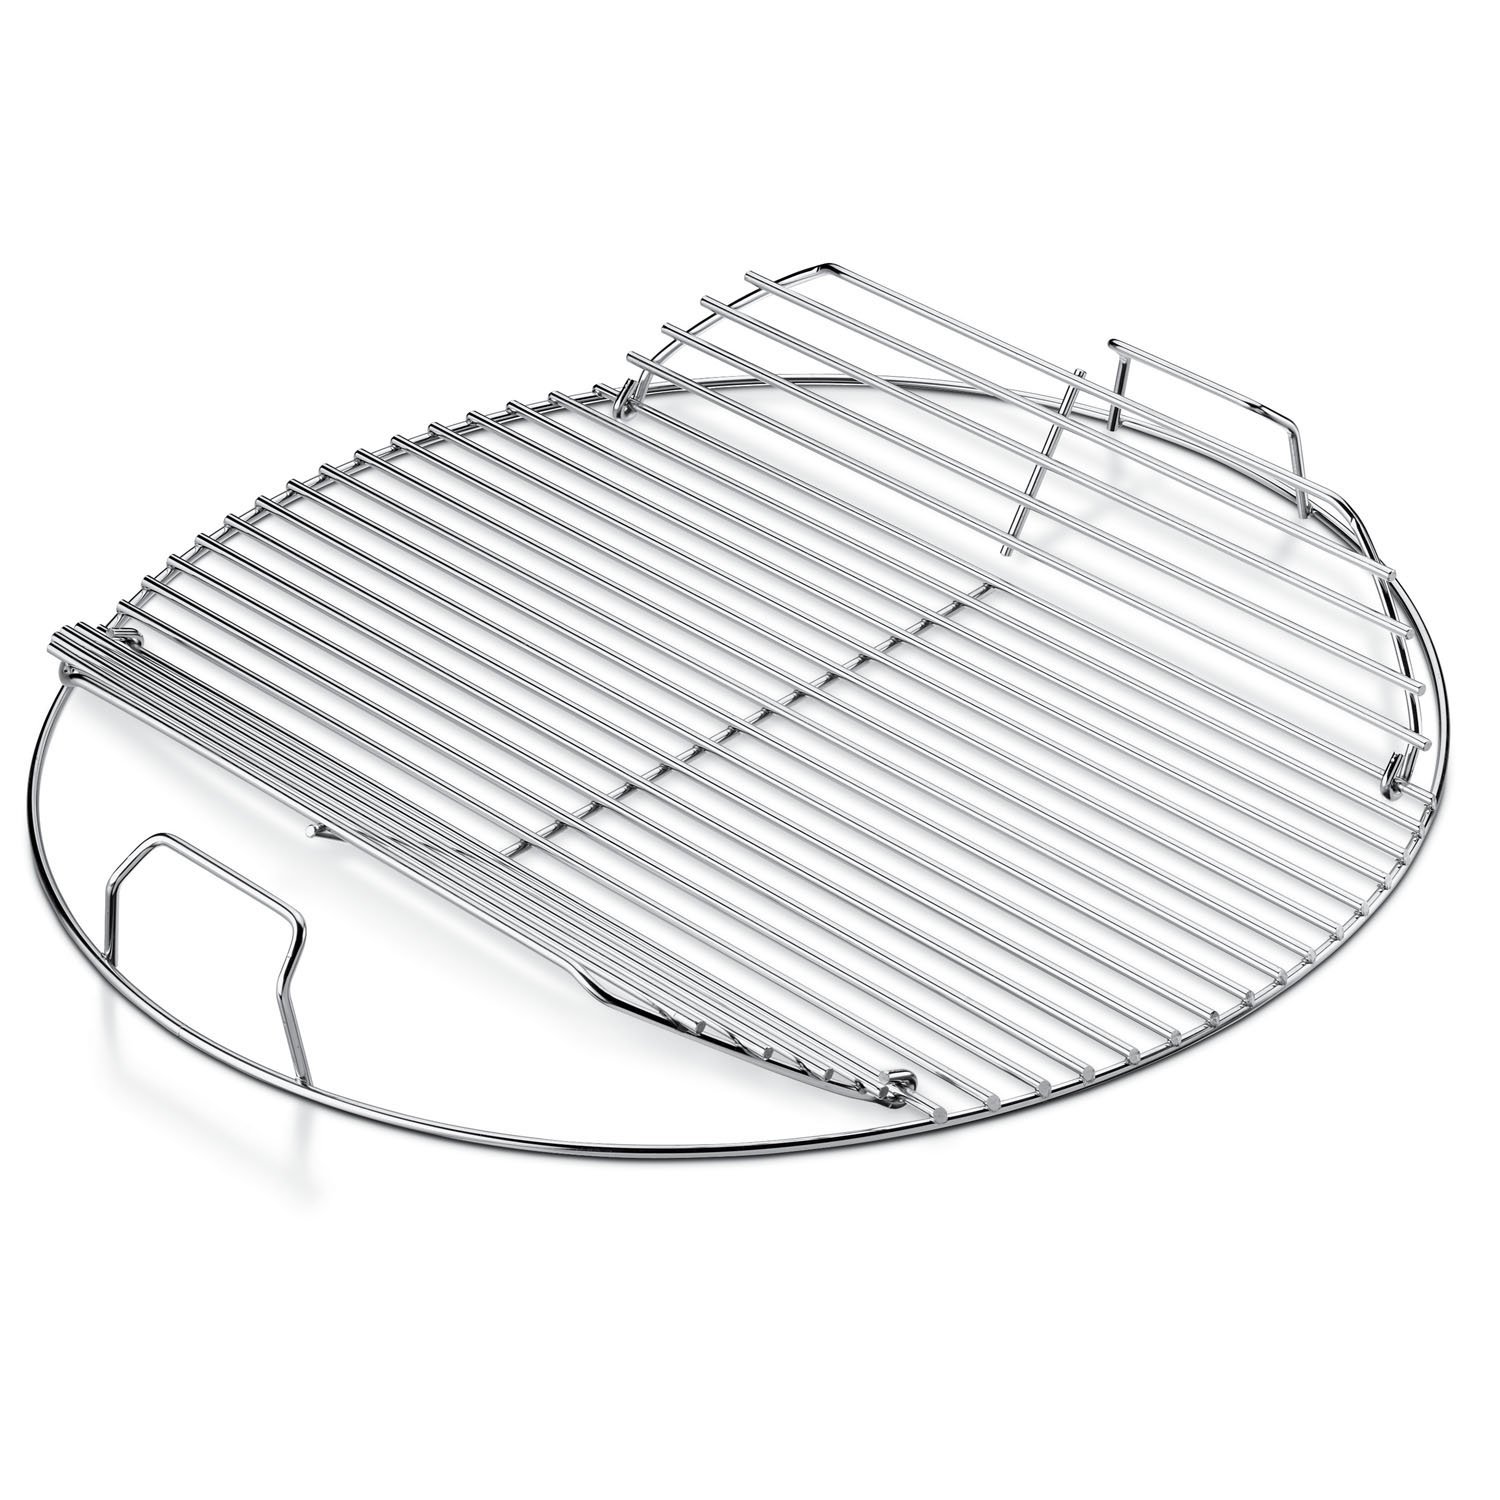 Primary image for Weber Hinged Cooking Grate for 22 Charcoal Grill